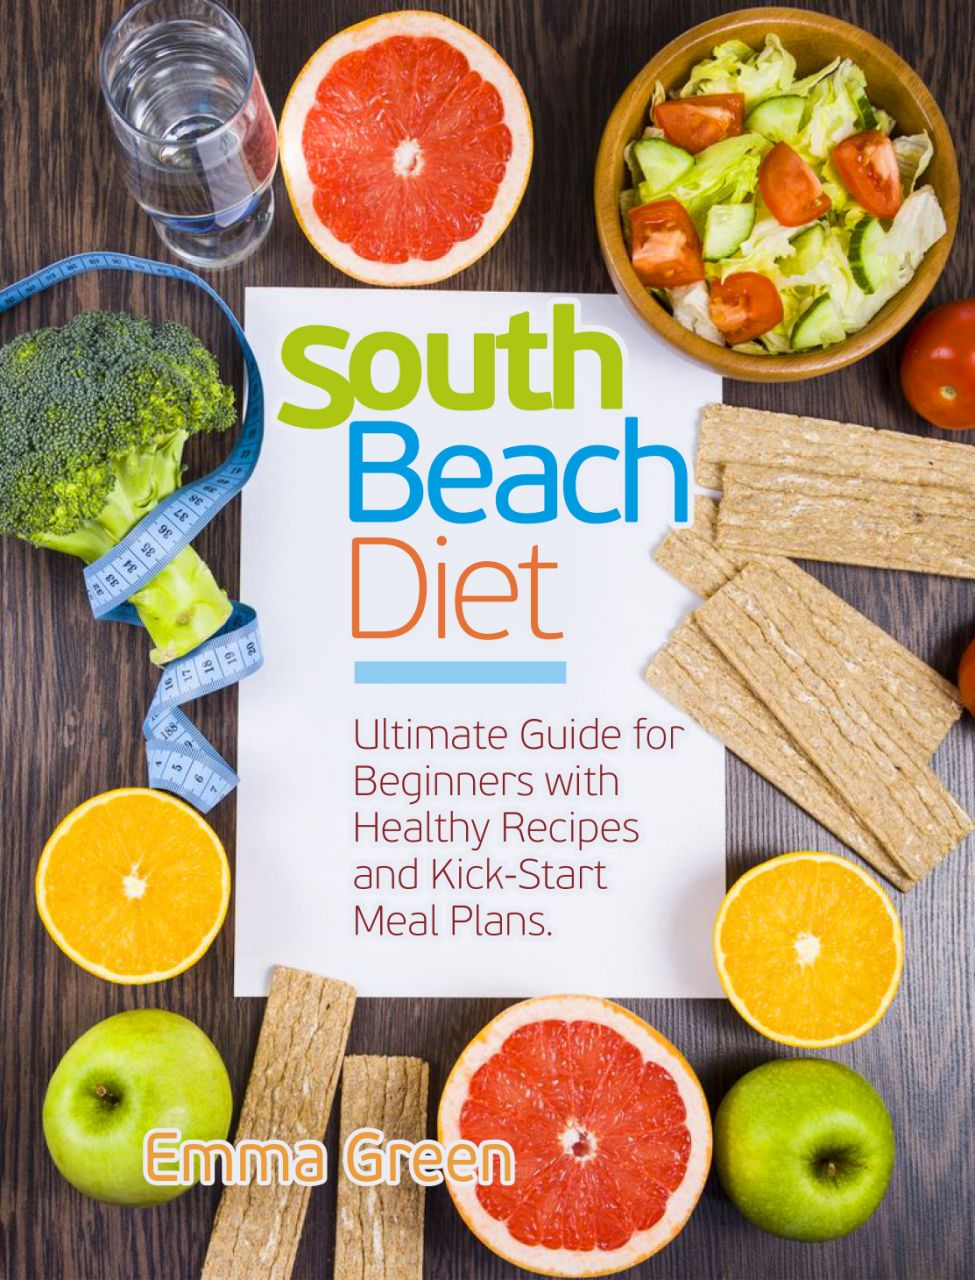 FREE: South Beach Diet: Ultimate Guide for Beginners with Healthy Recipes and Kick-Start Meal Plans. by Emma Green